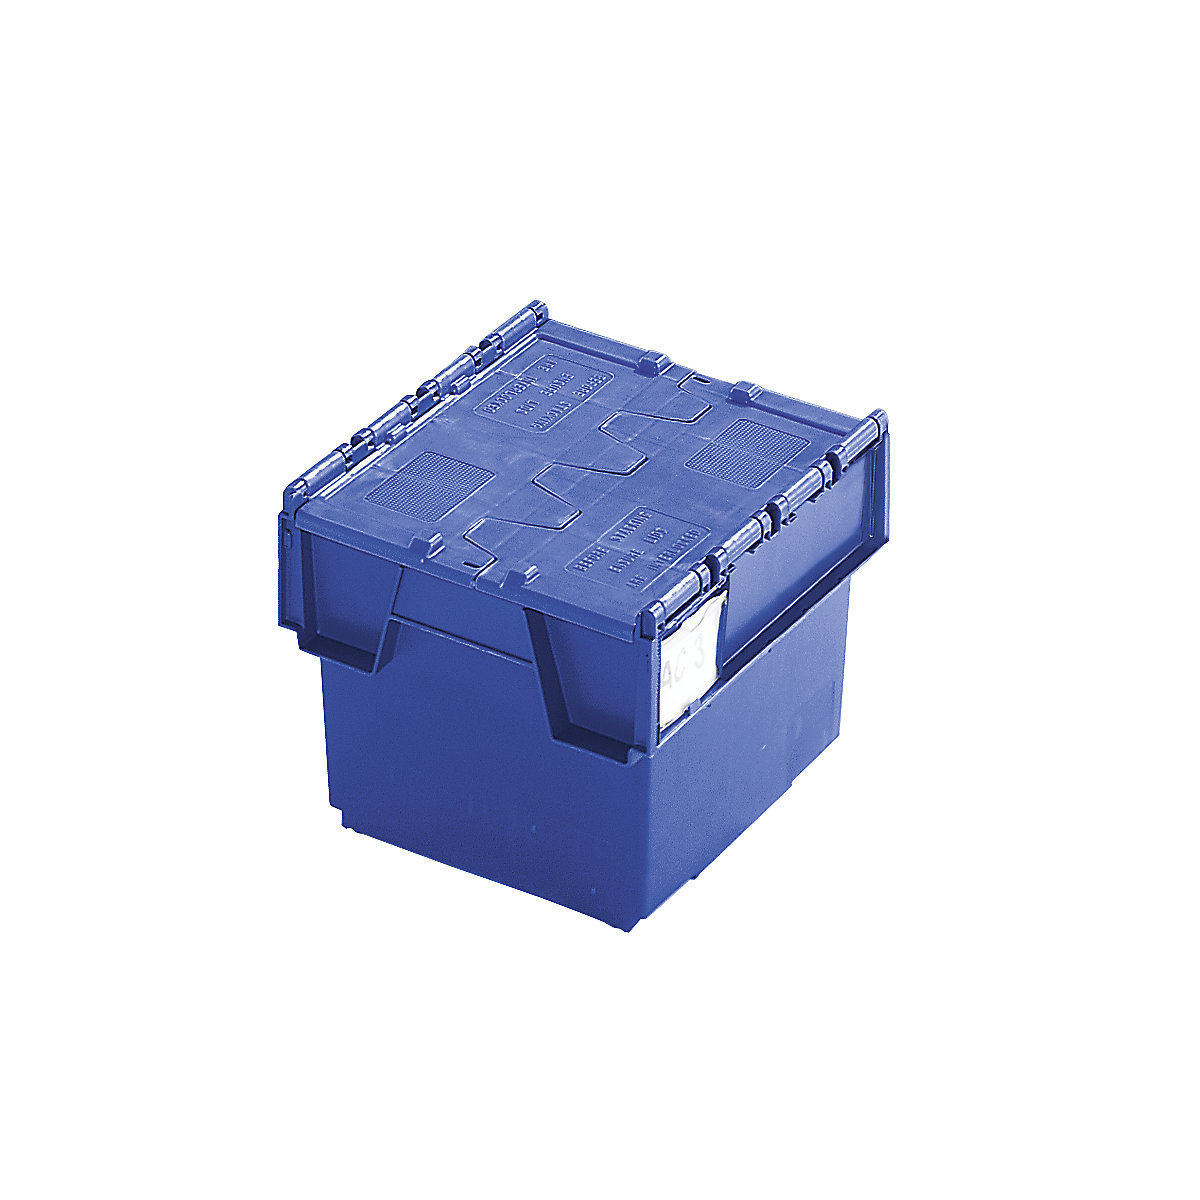 Reusable stacking containers with folding lids, capacity 20 litres, LxWxH 400 x 300 x 252 mm, blue